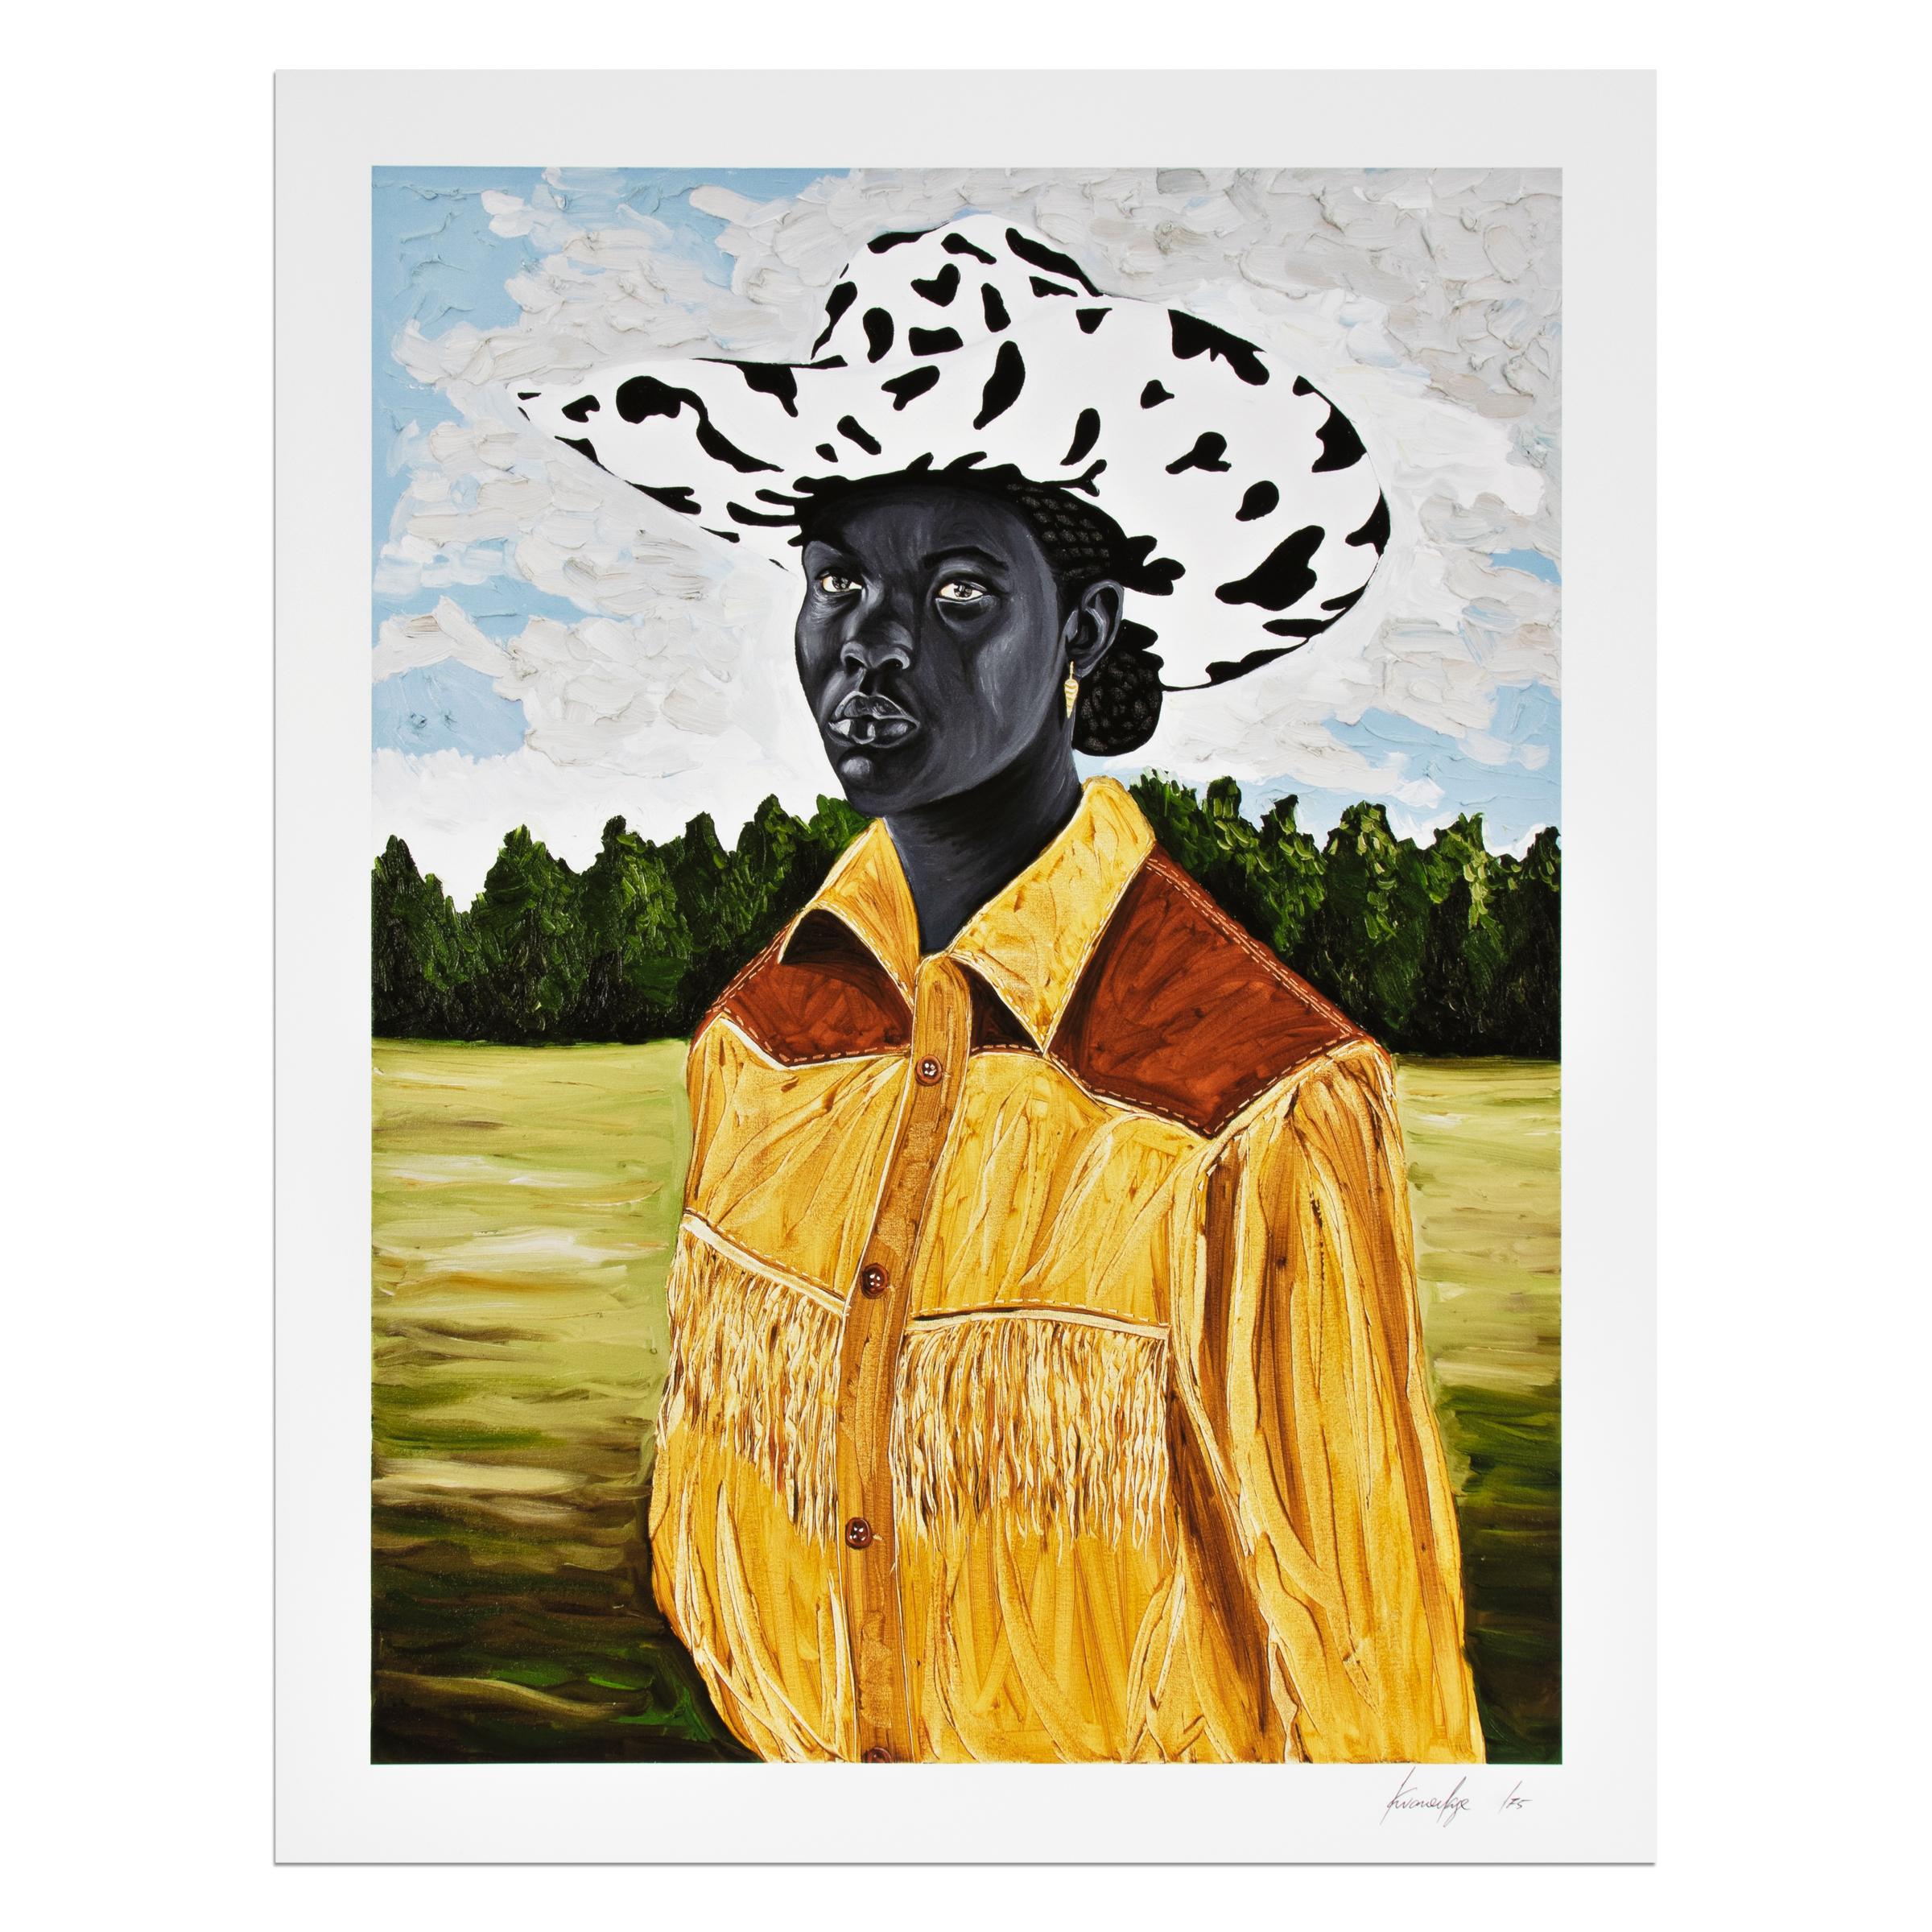 Otis Kwame Kye Quaicoe (Ghanaian, b. 1988)
Rancher, 2021
Medium: Archival pigment print on cotton paper
Dimensions: 90 x 70 cm (35 3/8 x 27 1/2 in)
Edition of 75 + 20 AP: Hand-signed and numbered
Condition: Mint